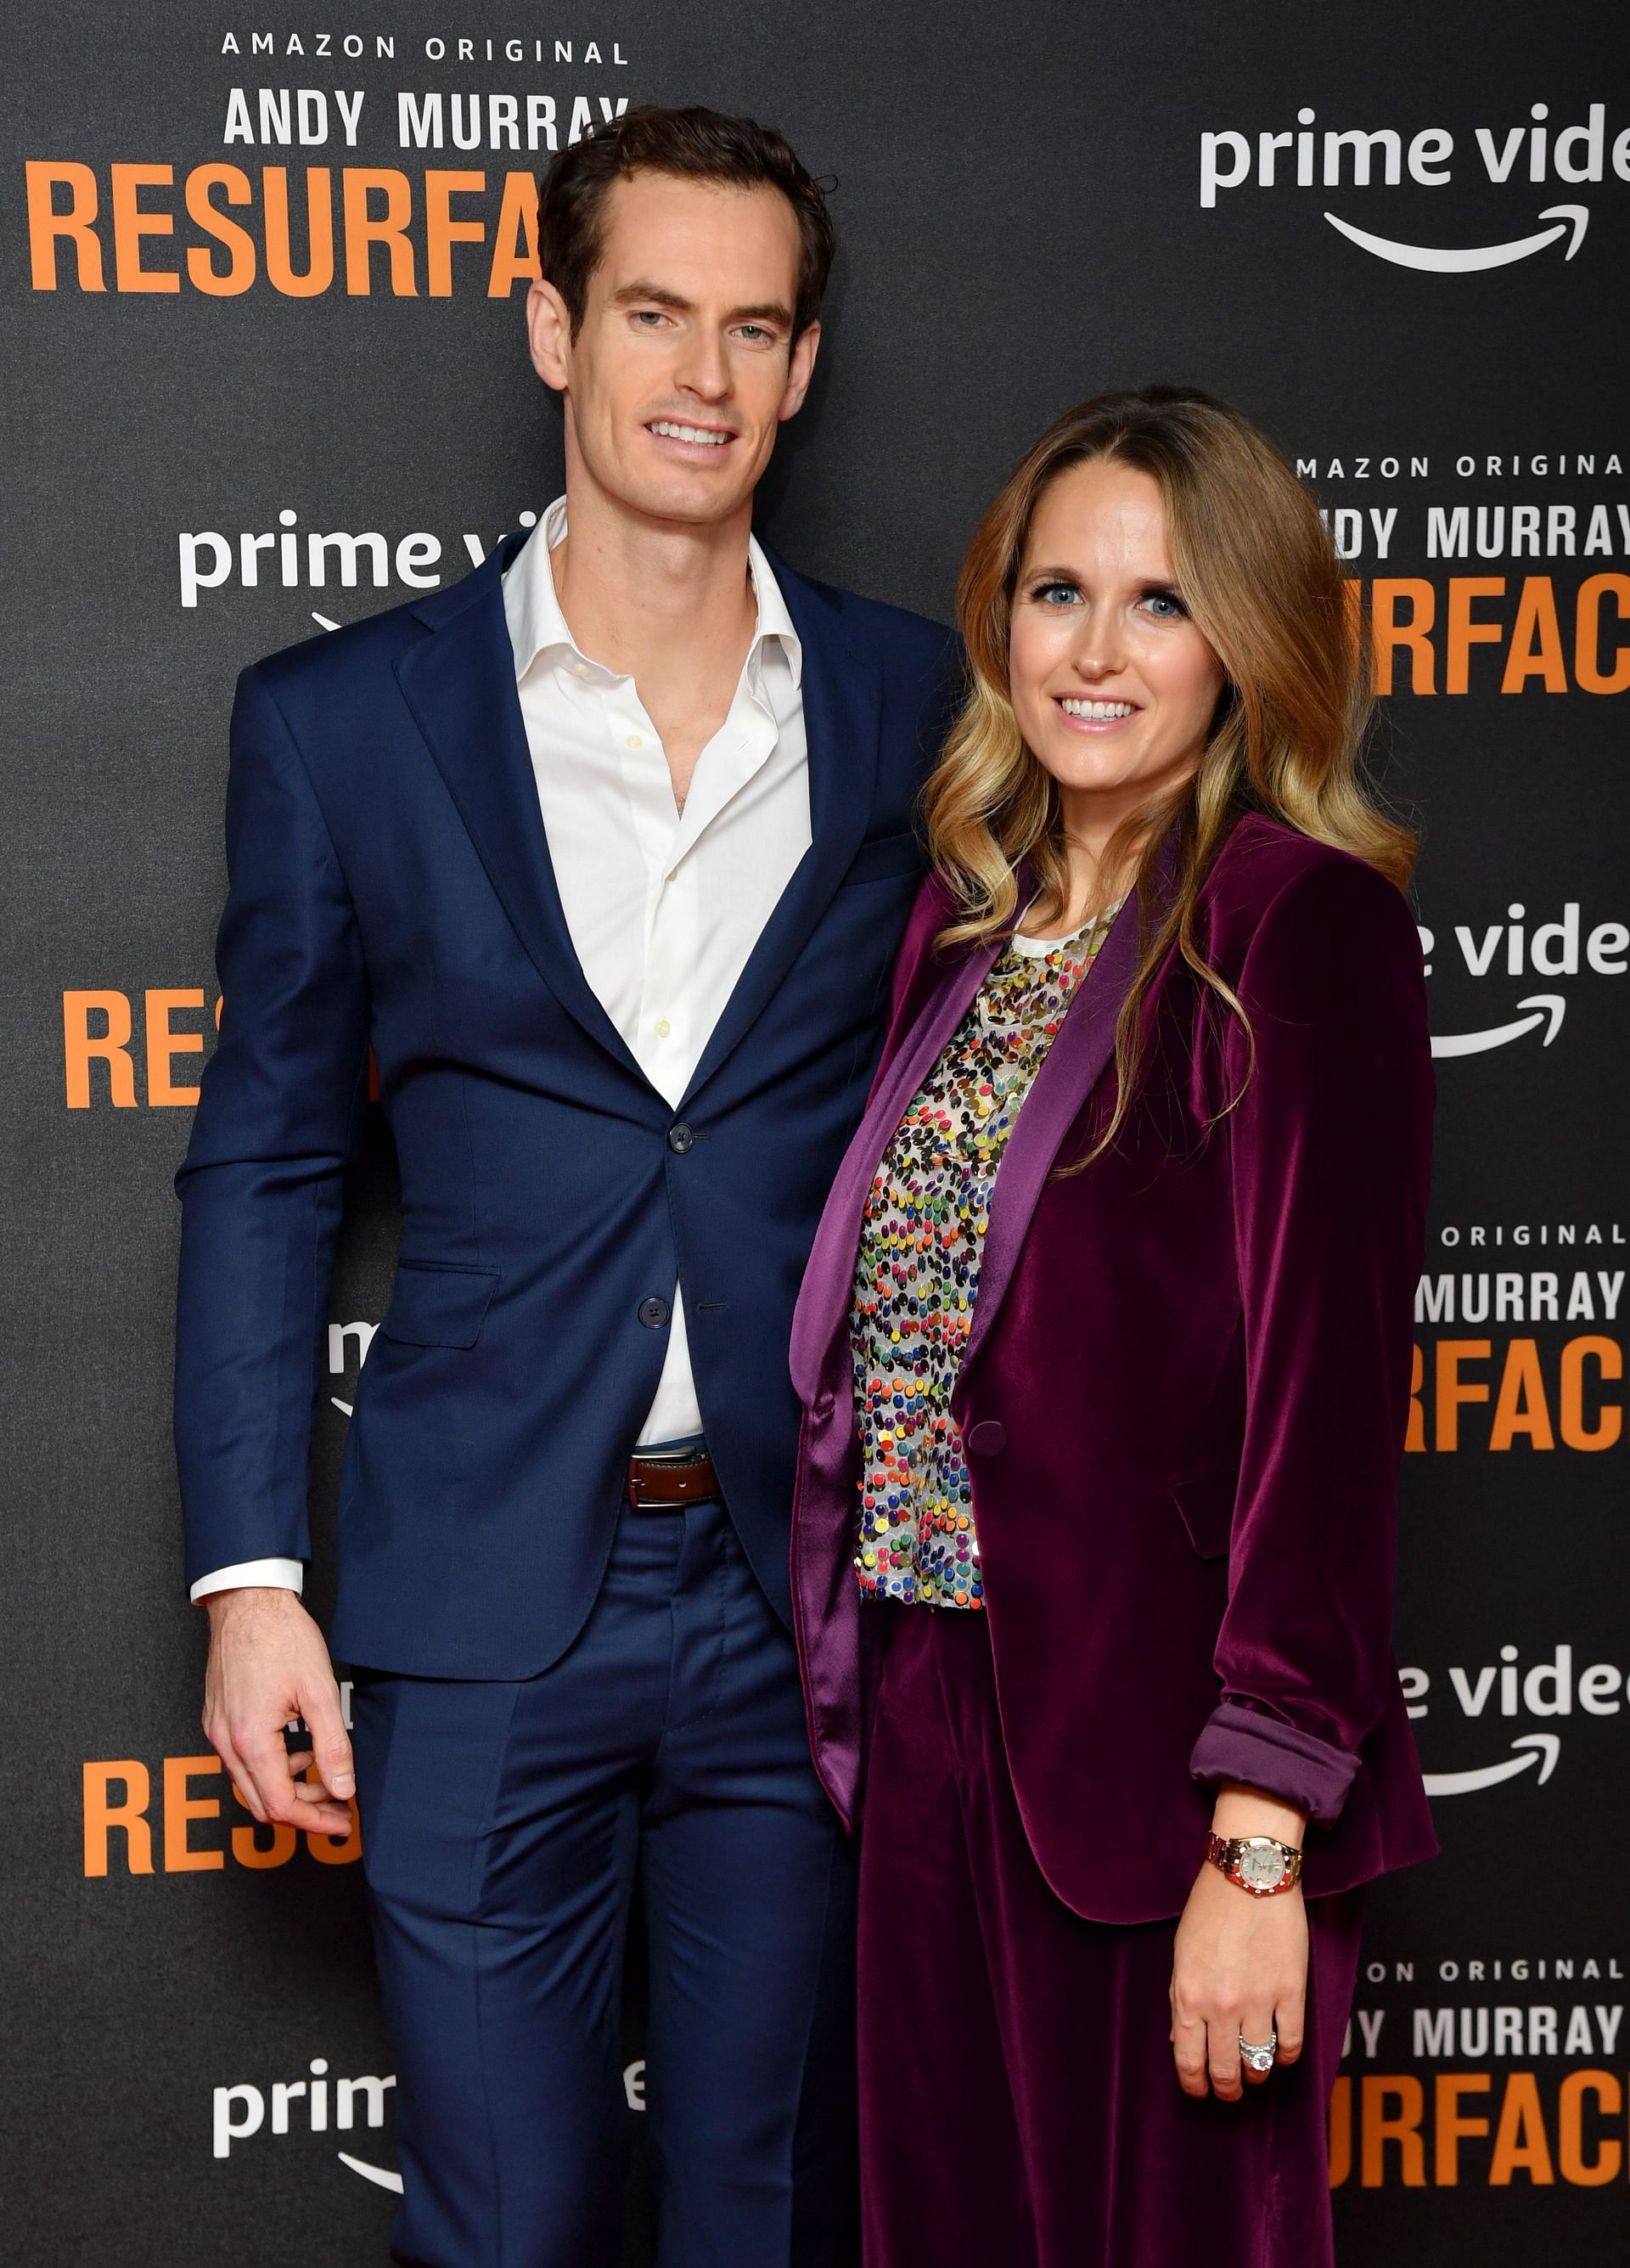 Andy Murray with his wife Kim Sears